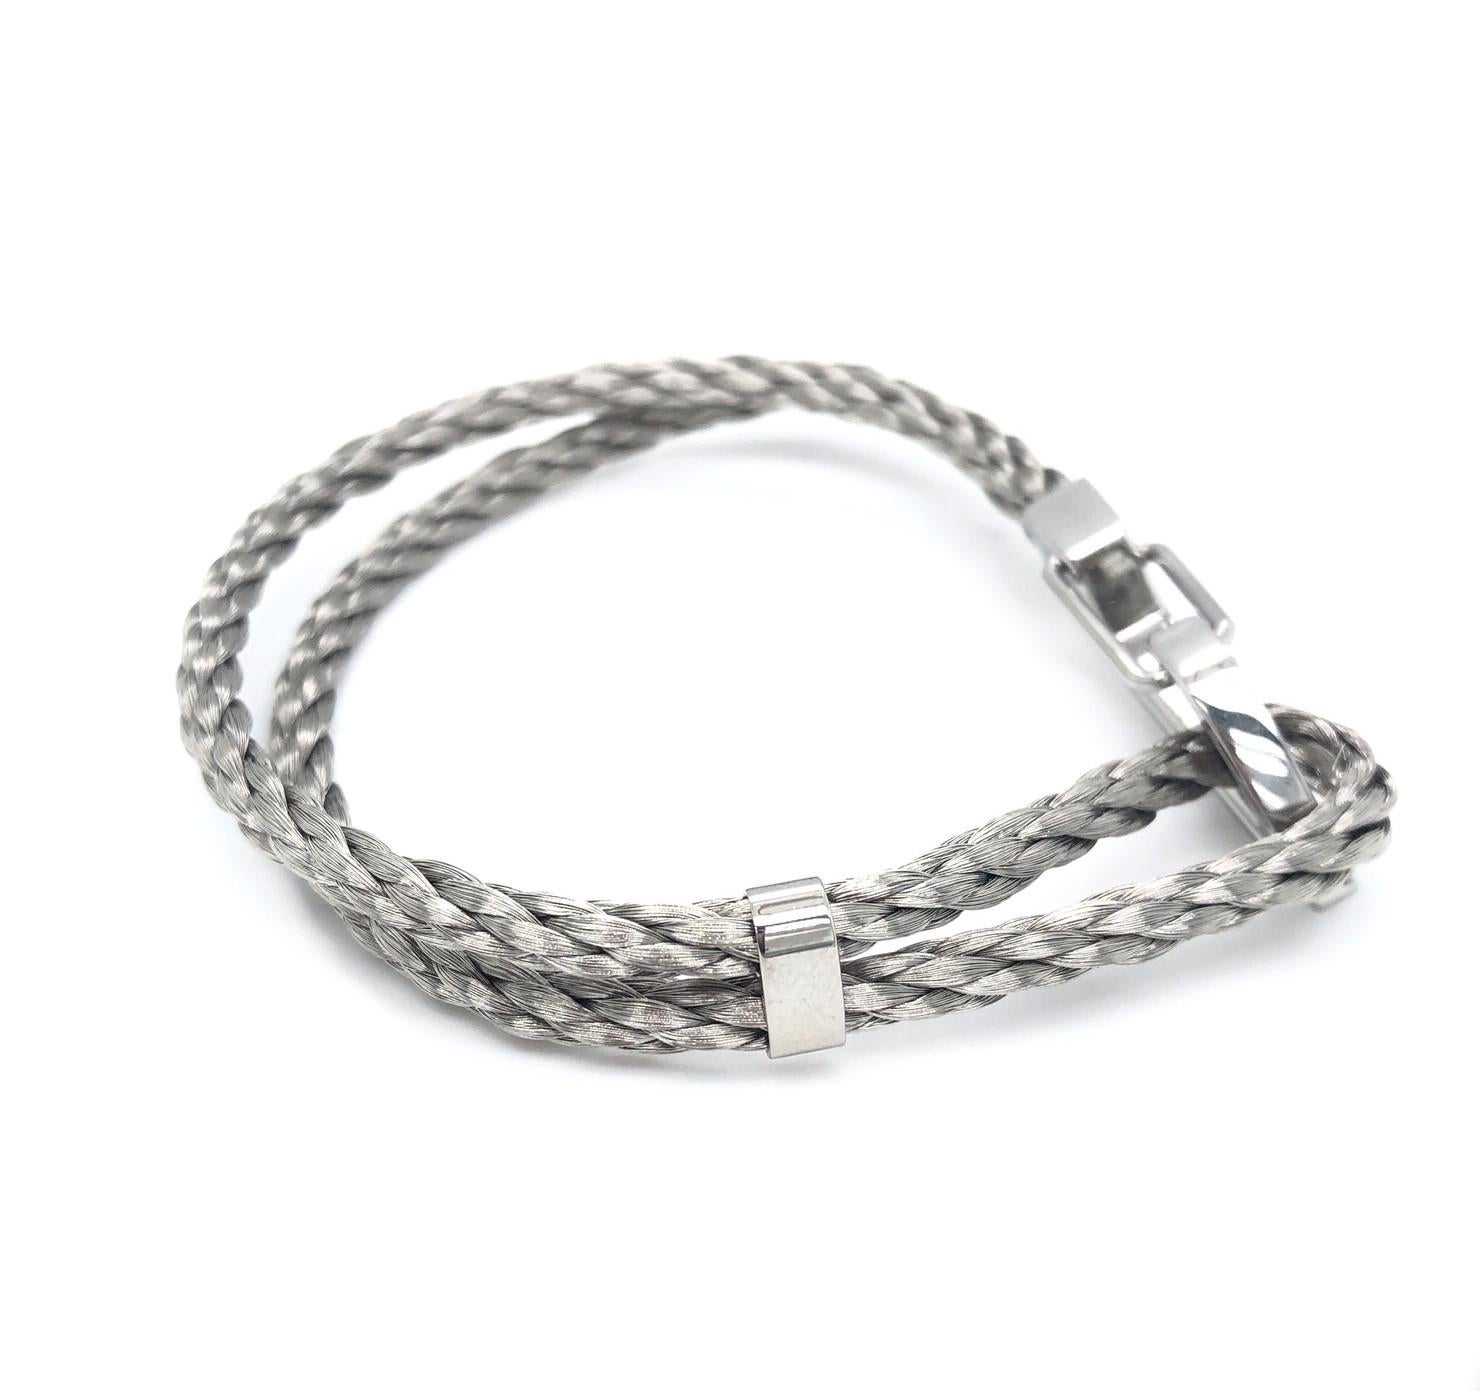 Montblanc Mens Steel Woven Bracelet. This bracelet has a polished stainless steel carabiner closure. Size Medium.